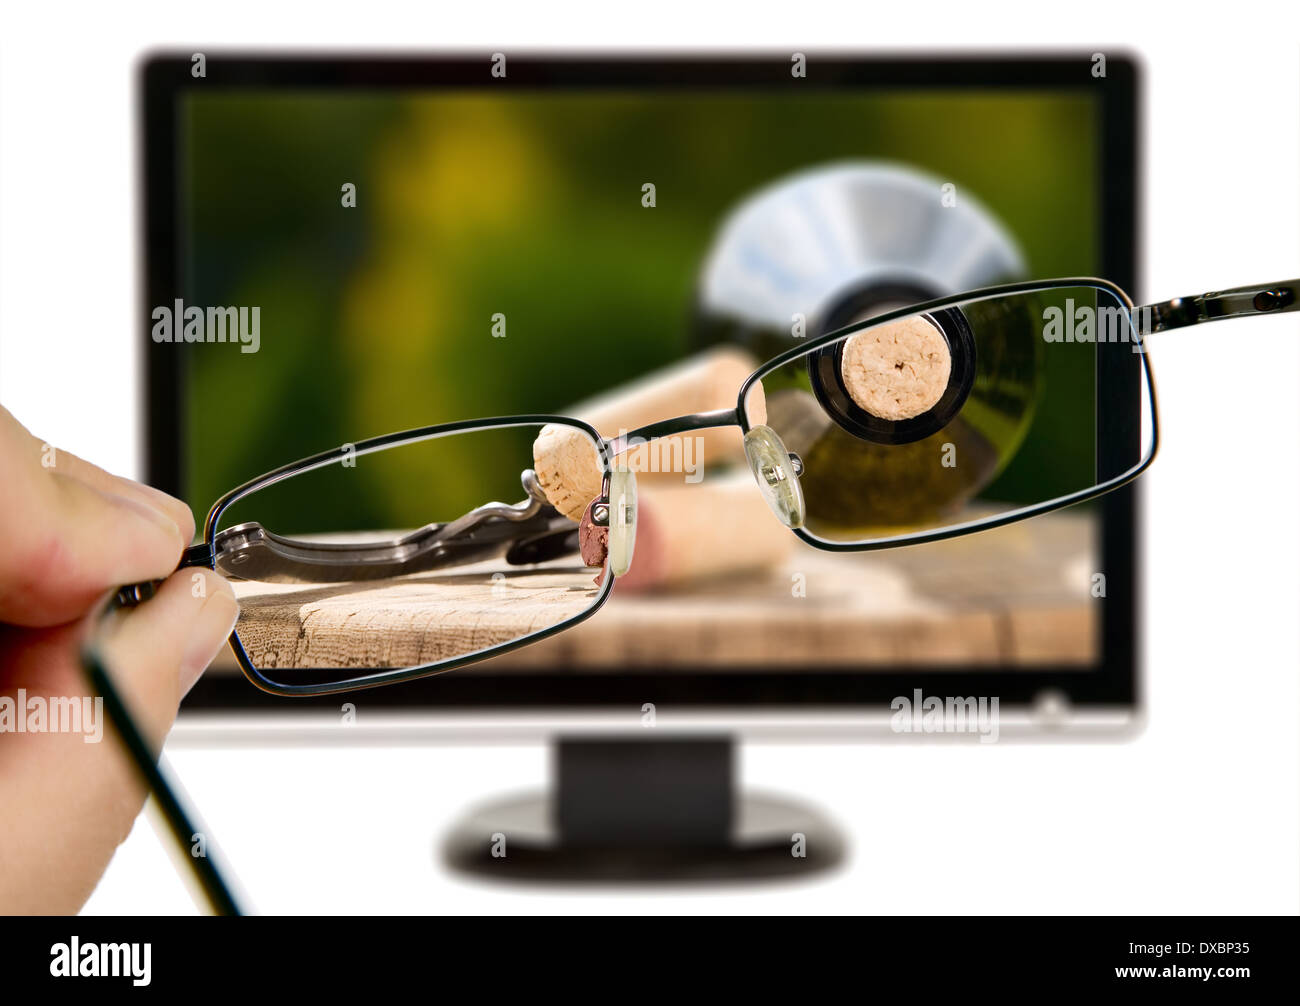 Man is viewing to wine bottle on display through eyeglasses Stock Photo